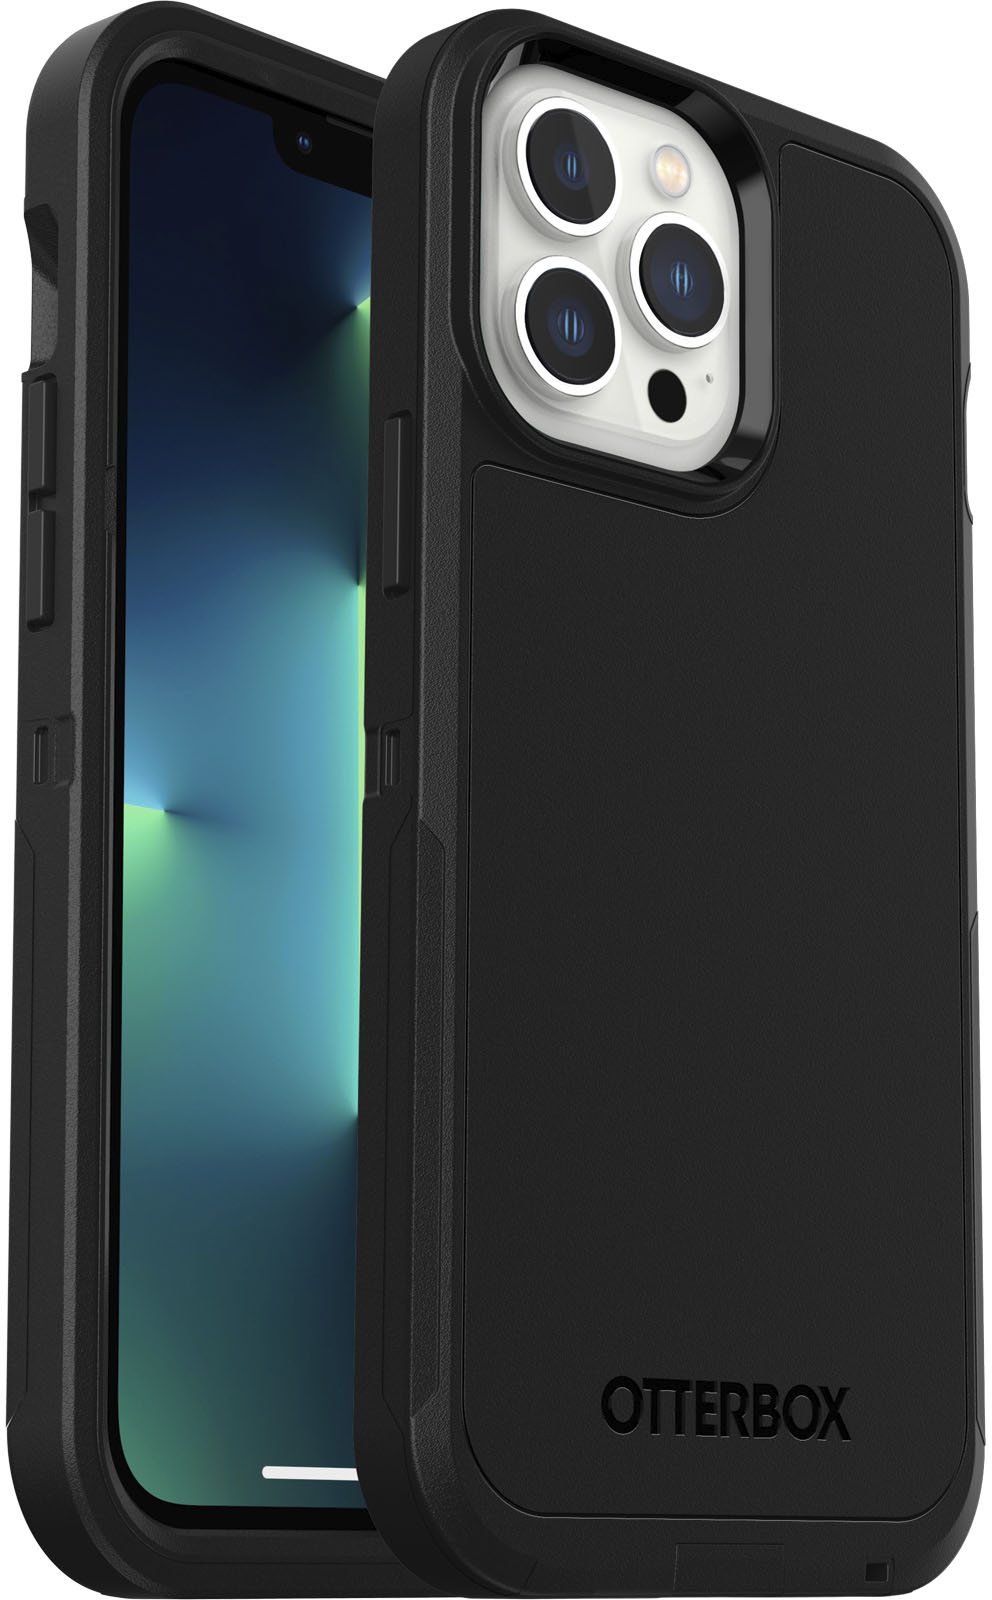 Angle View: OtterBox - Defender Series Pro XT Hard Shell for Apple iPhone 13 Pro Max and iPhone 12 Pro Max - Black